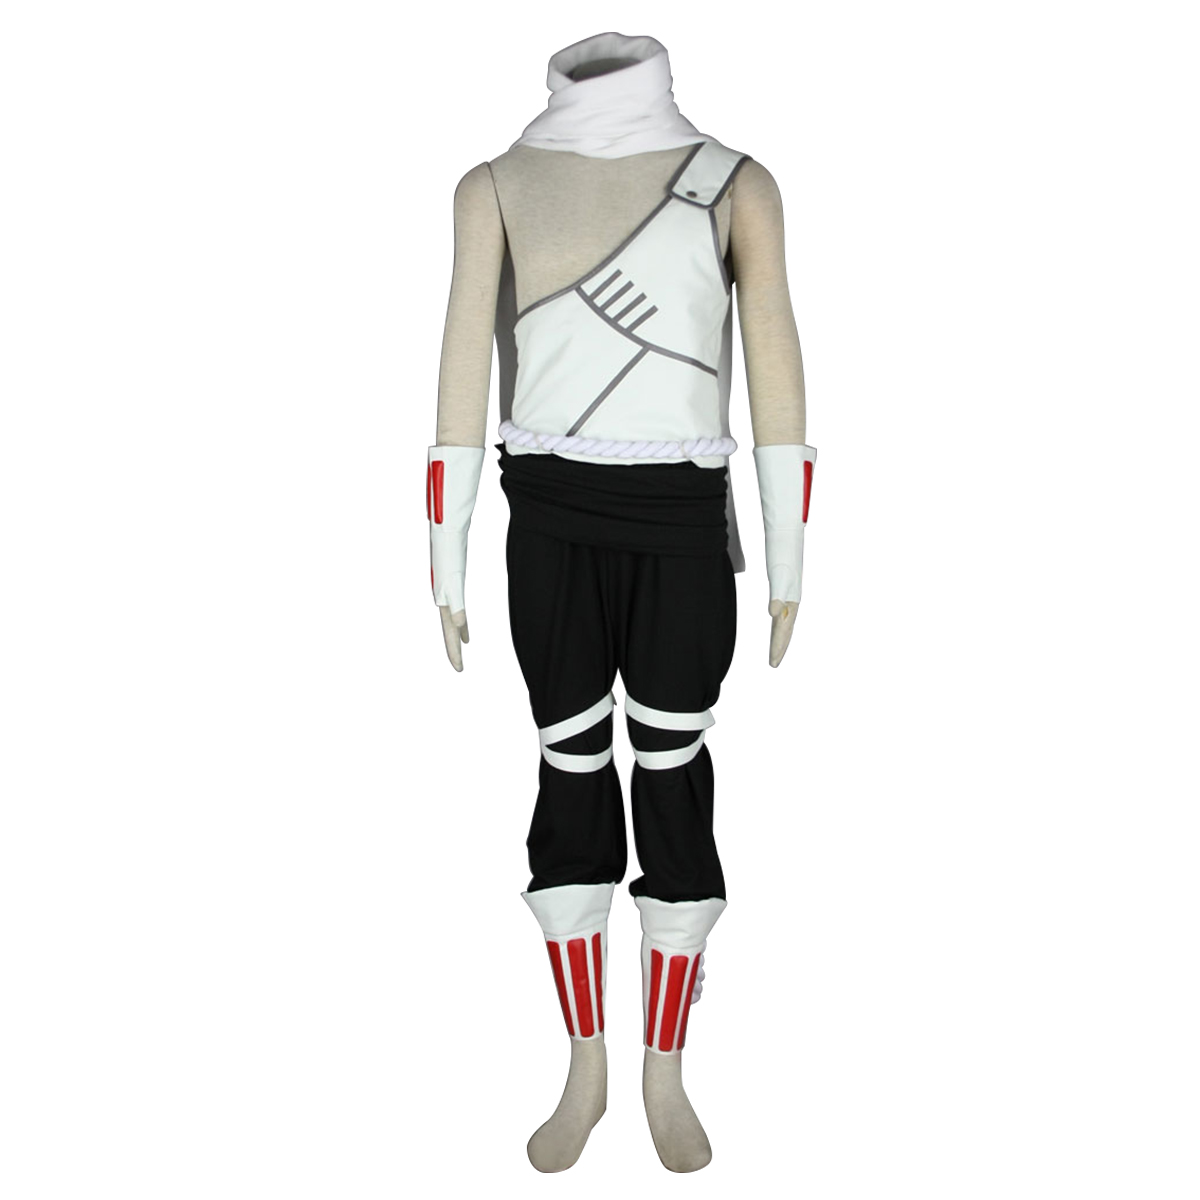 Naruto Killer B 1 Anime Cosplay Costumes Outfit.